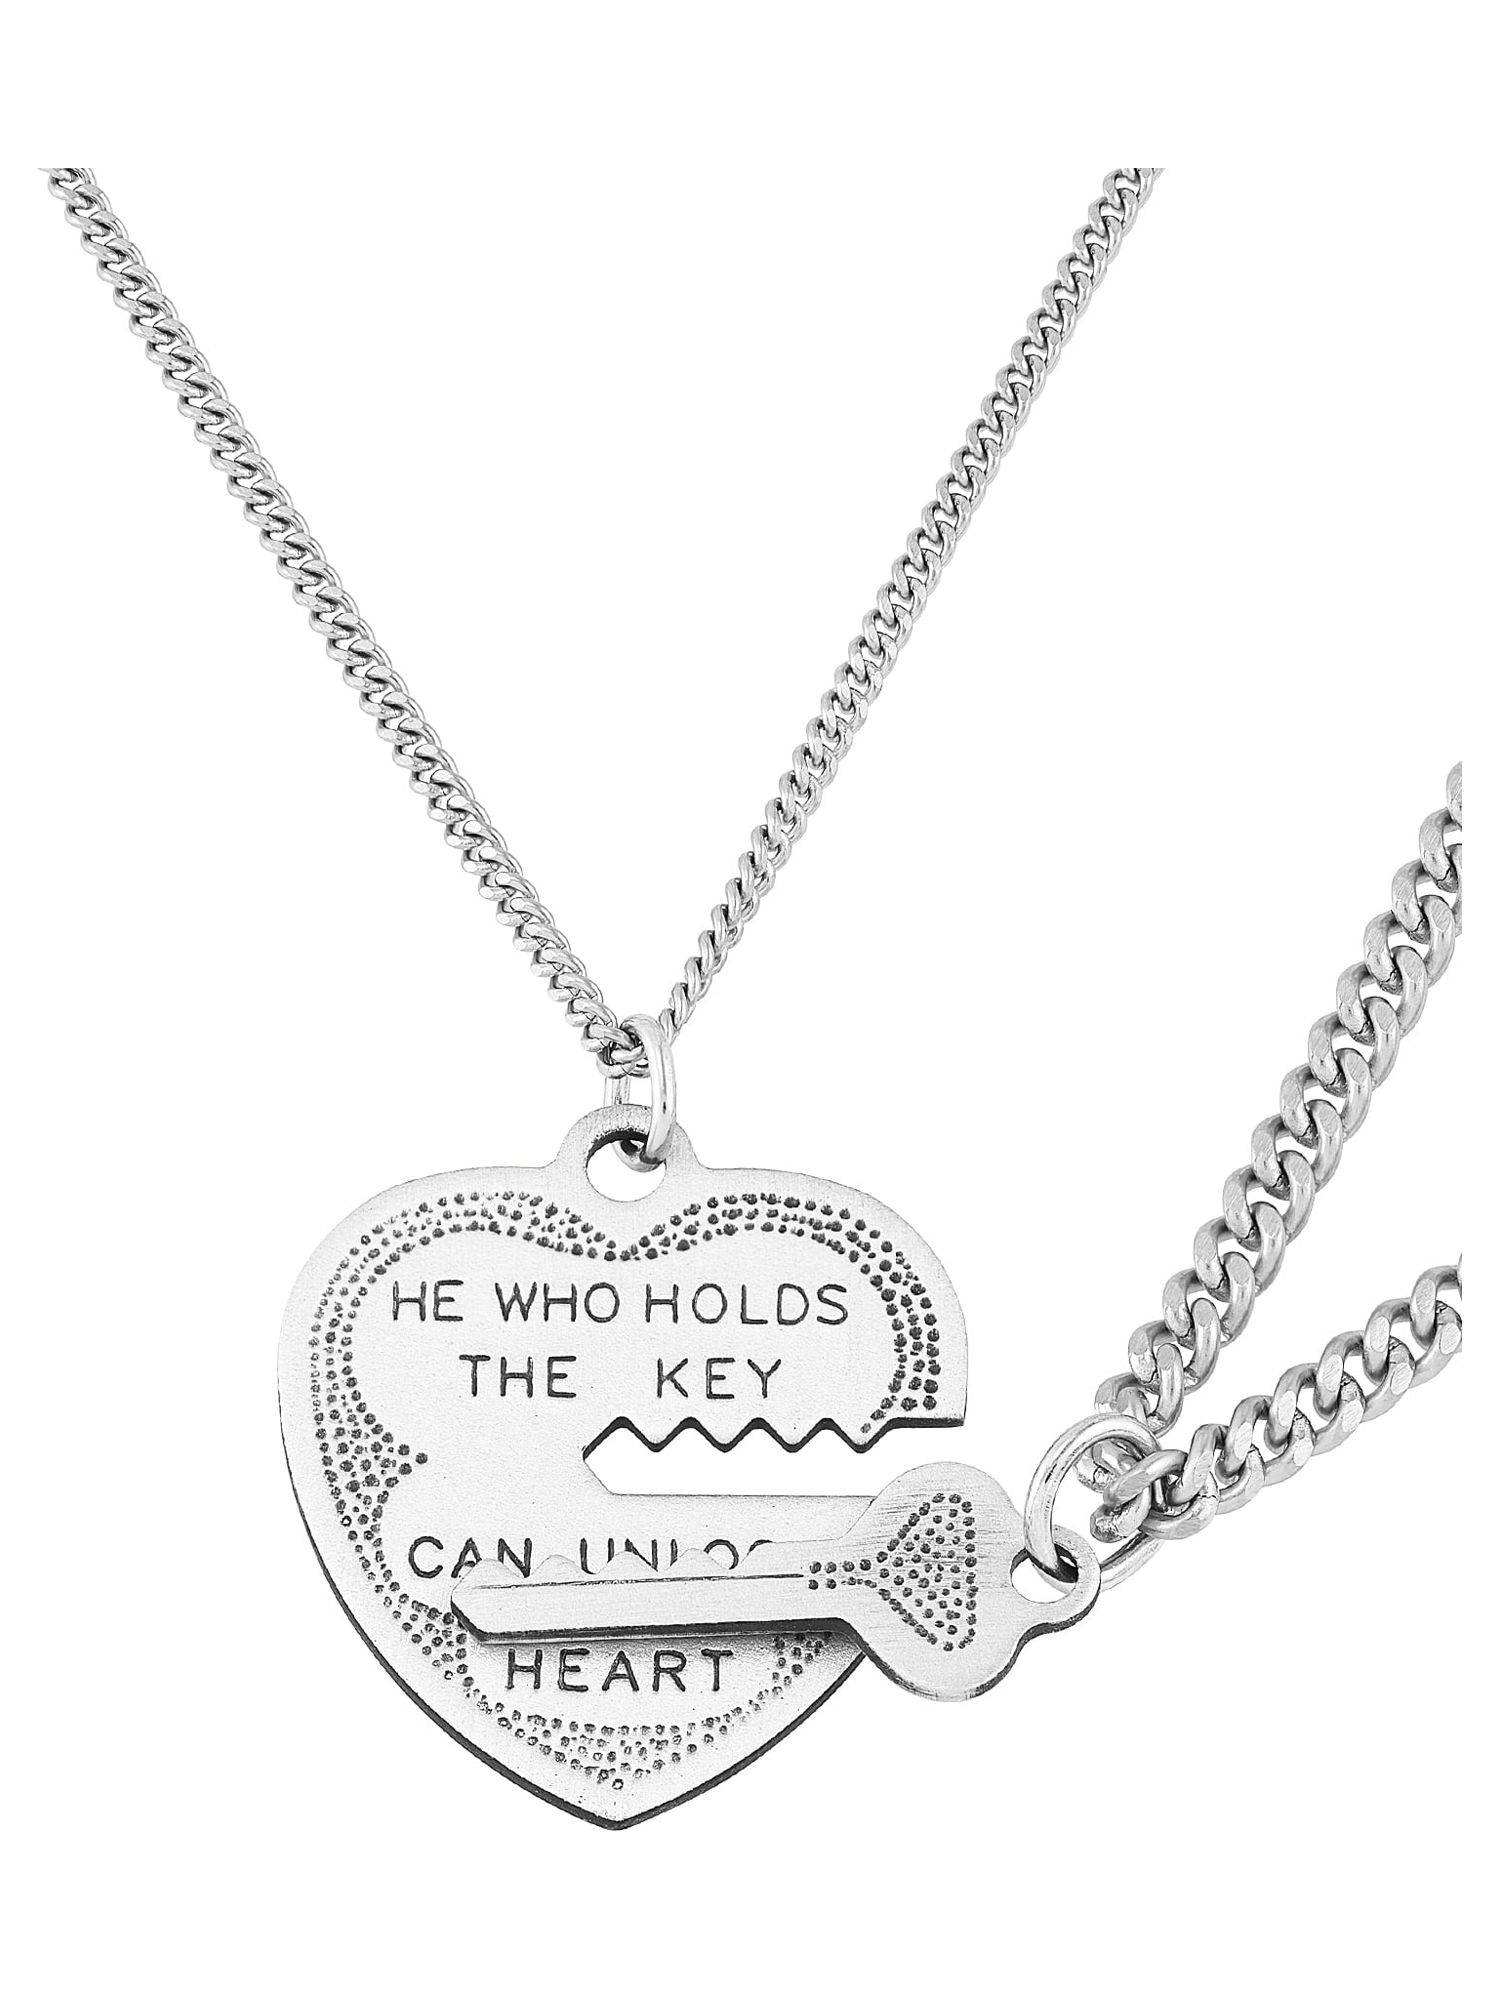 Brilliance Fine Jewelry Sterling Silver Breakable Heart Key Pendant Necklace Set,18" - image 2 of 11